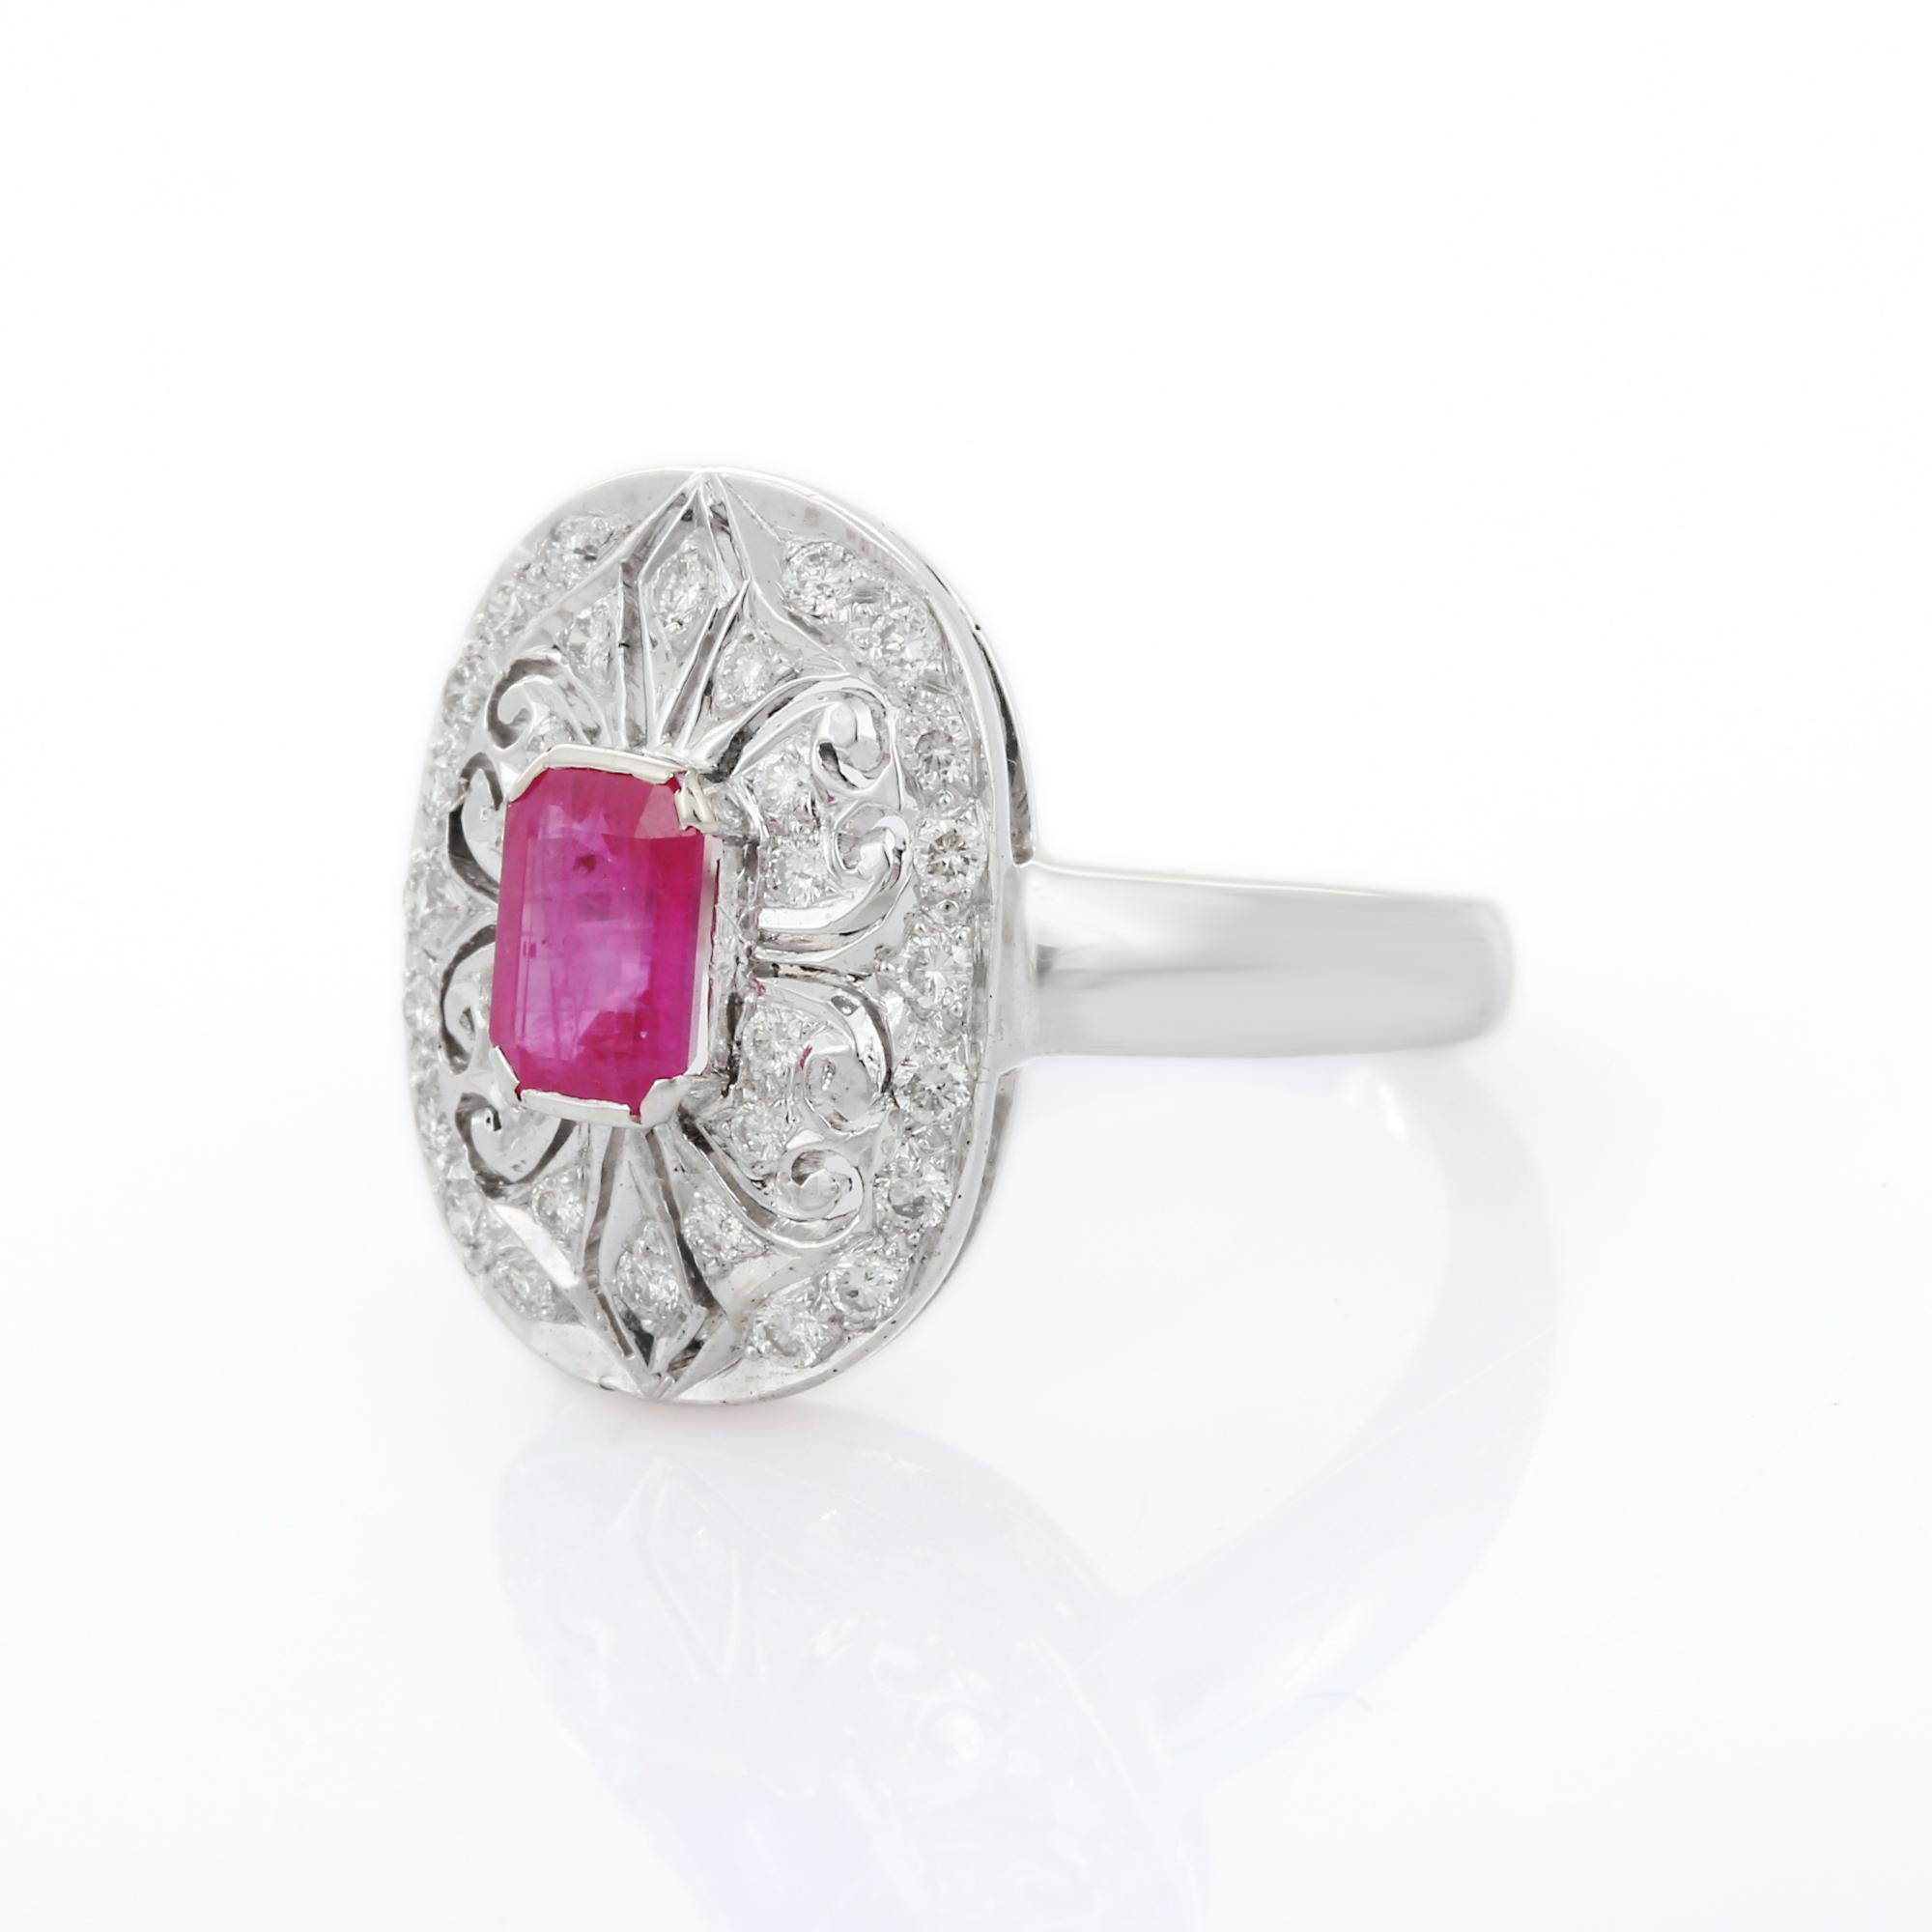 For Sale:  Clustered Diamond Cocktail Ring with 2.31 Carat Ruby in 18K White Gold Engraving 5